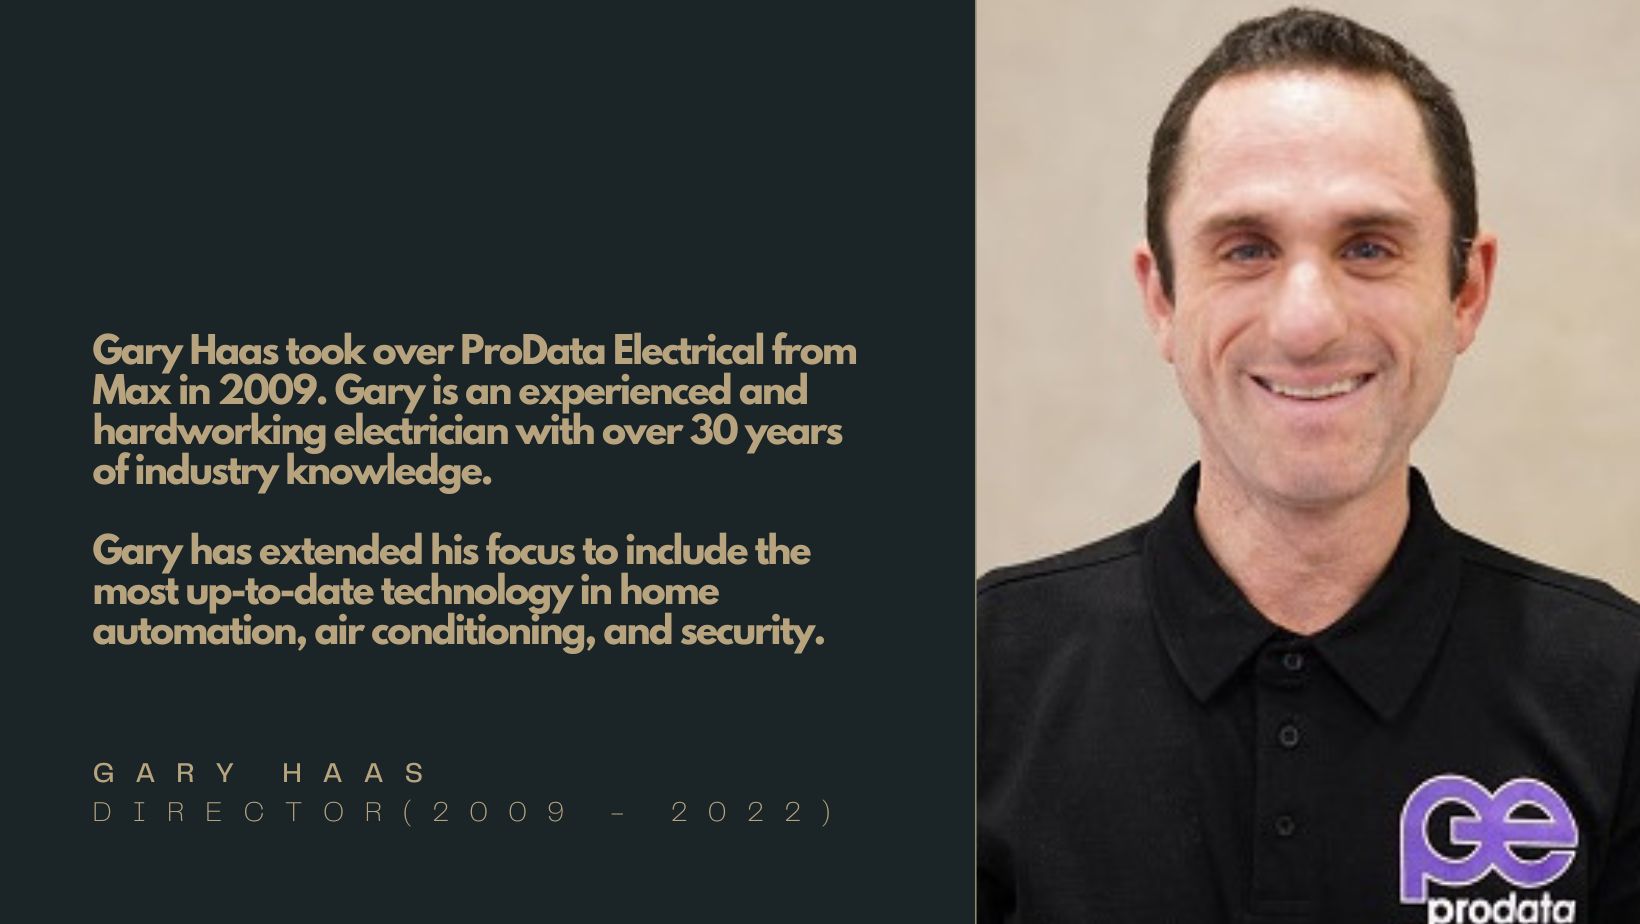 Gary Haas prodata electrical contracting